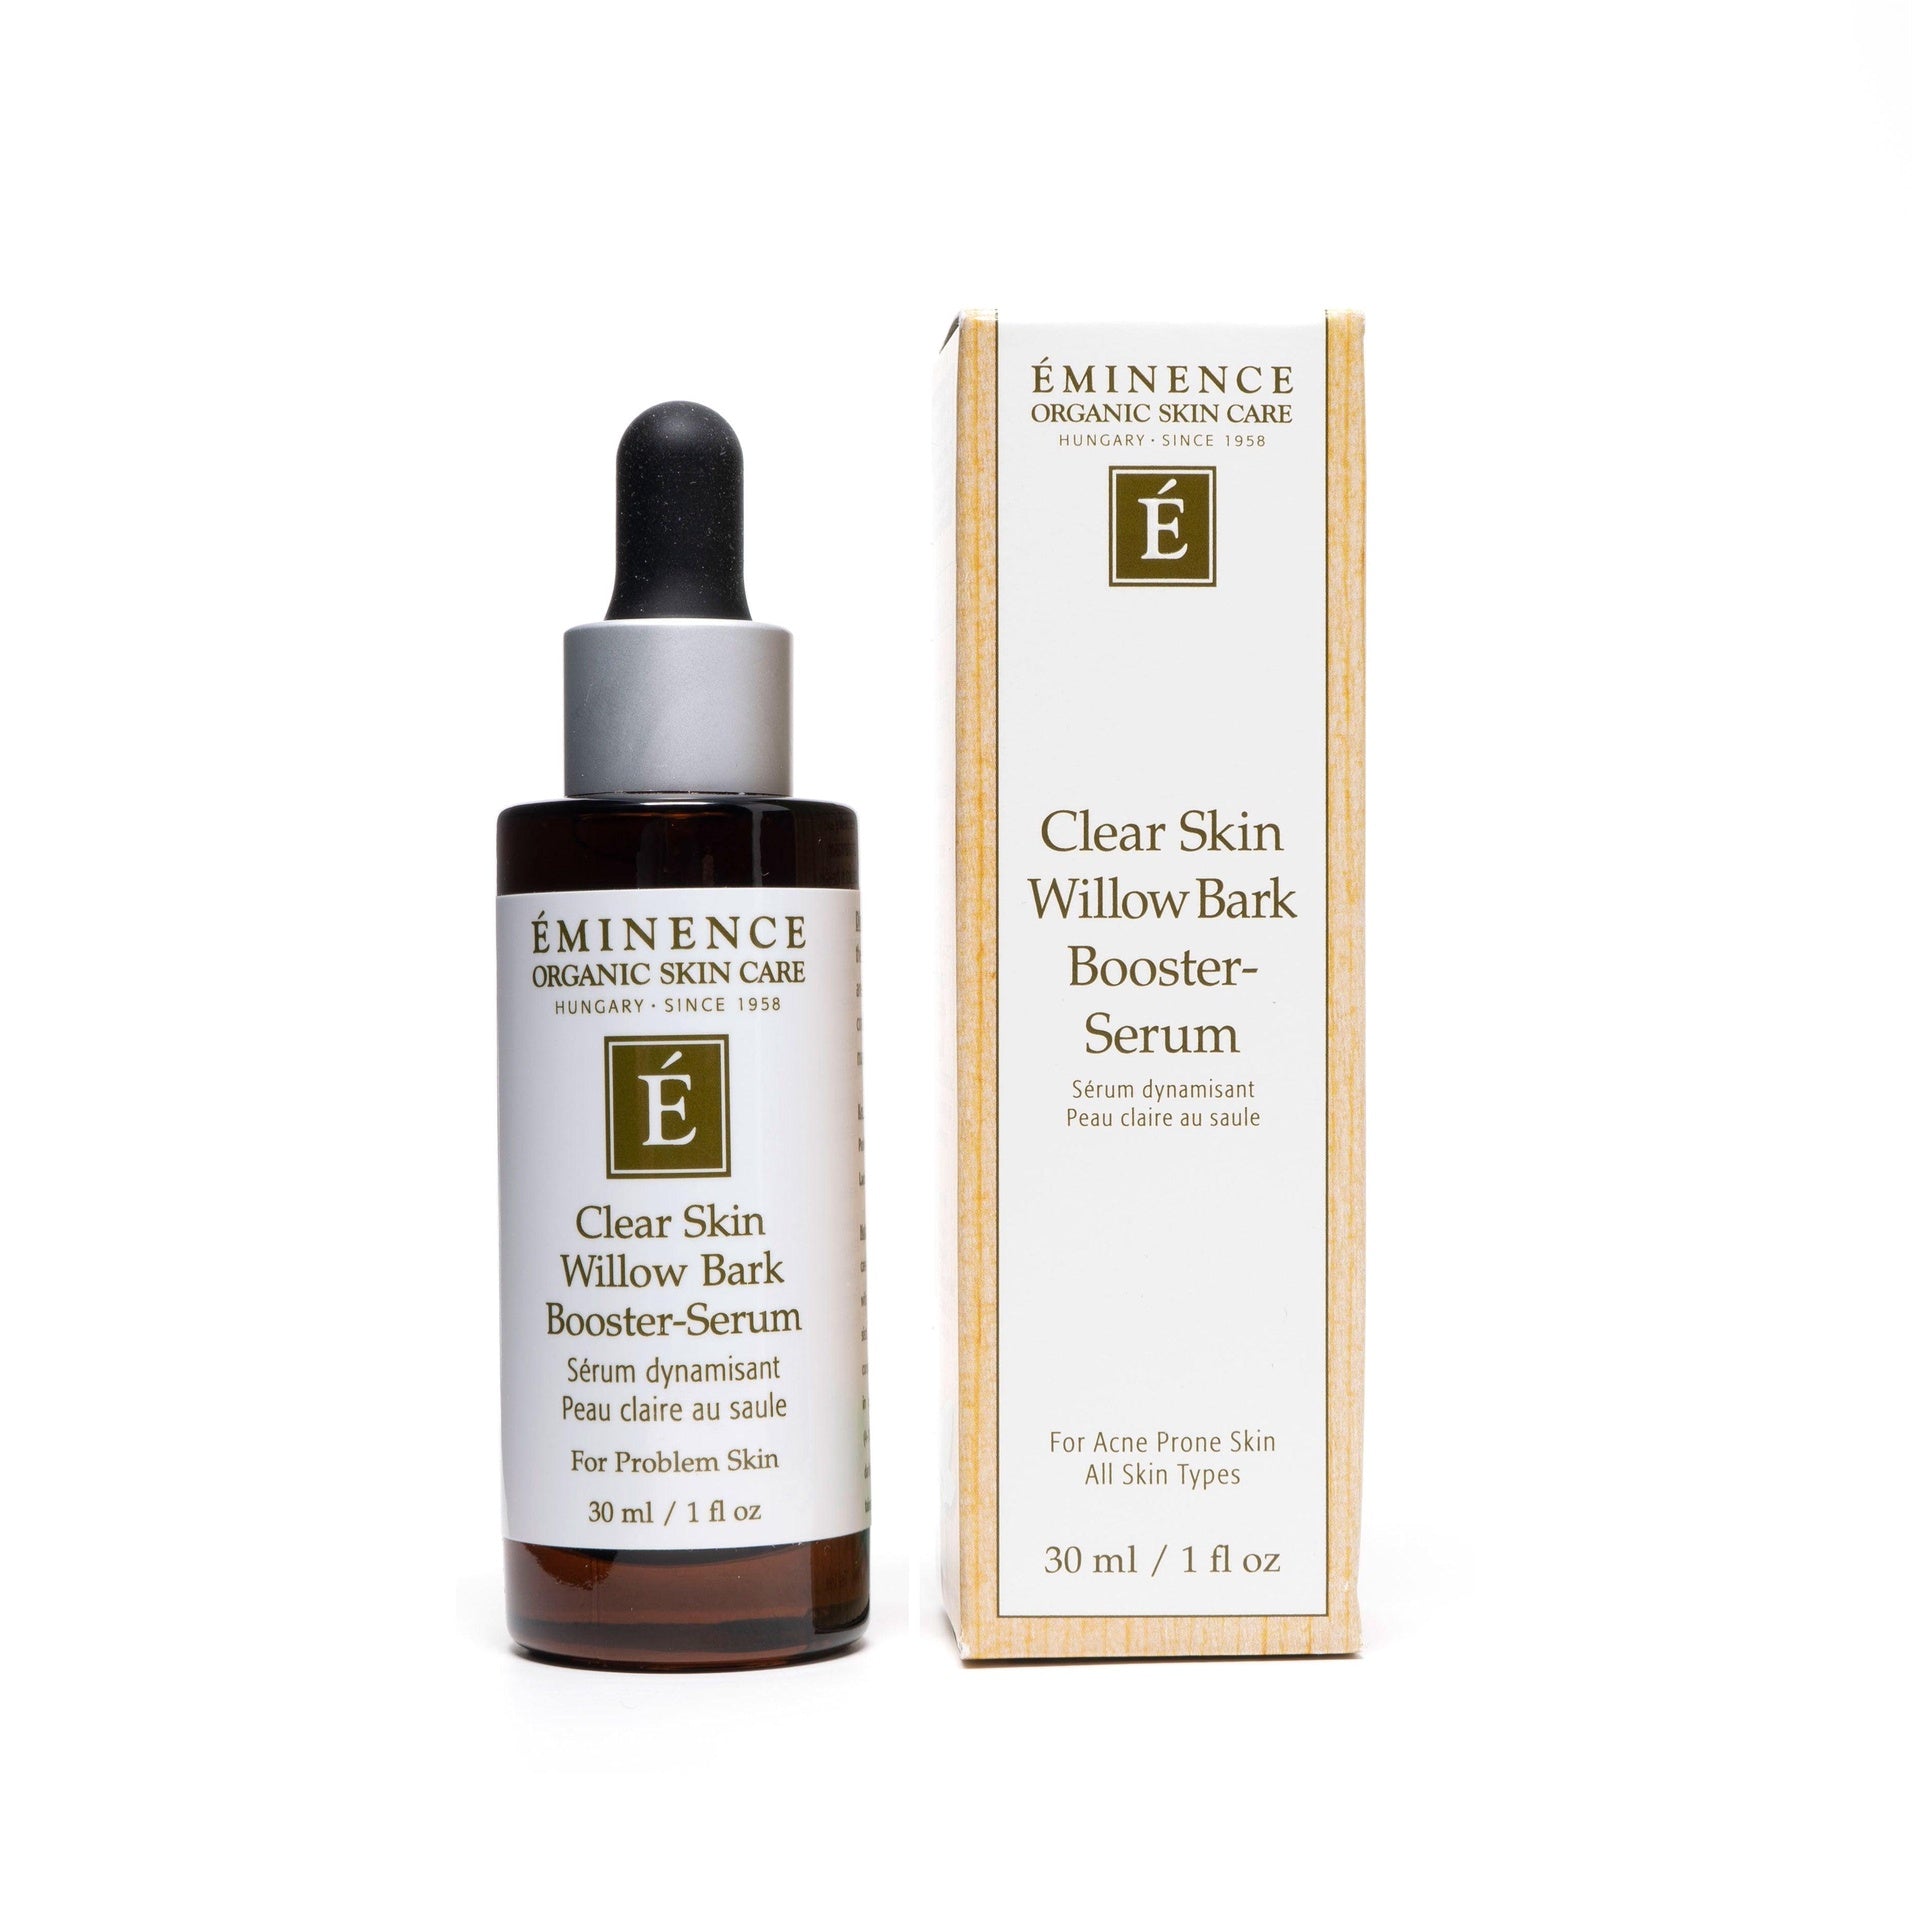 Clear Skin Willow Bark Booster